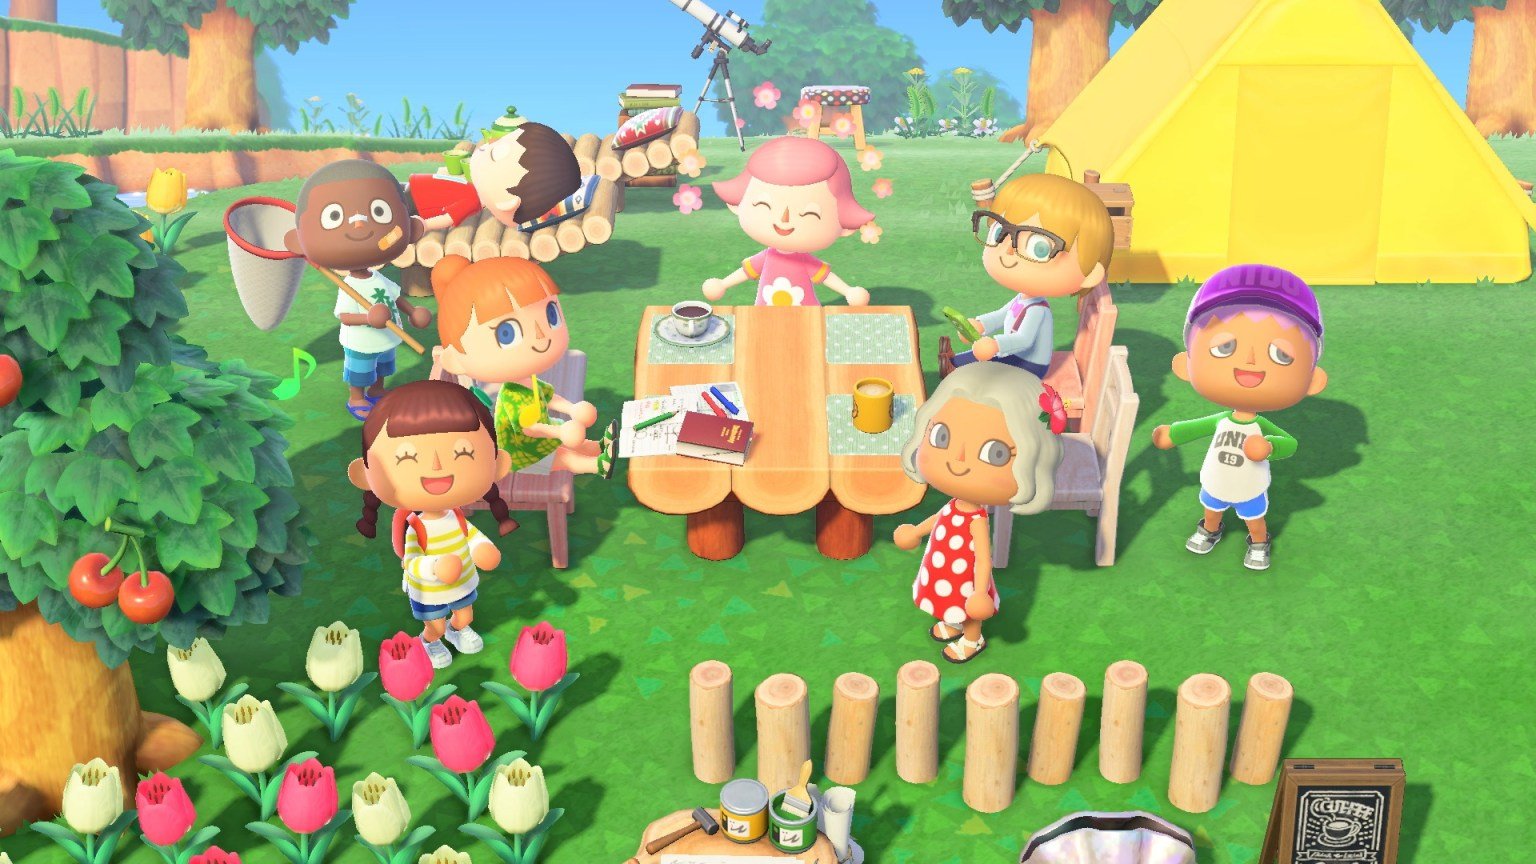 The next update for Animal Crossing: New Horizons will be announced on October 15